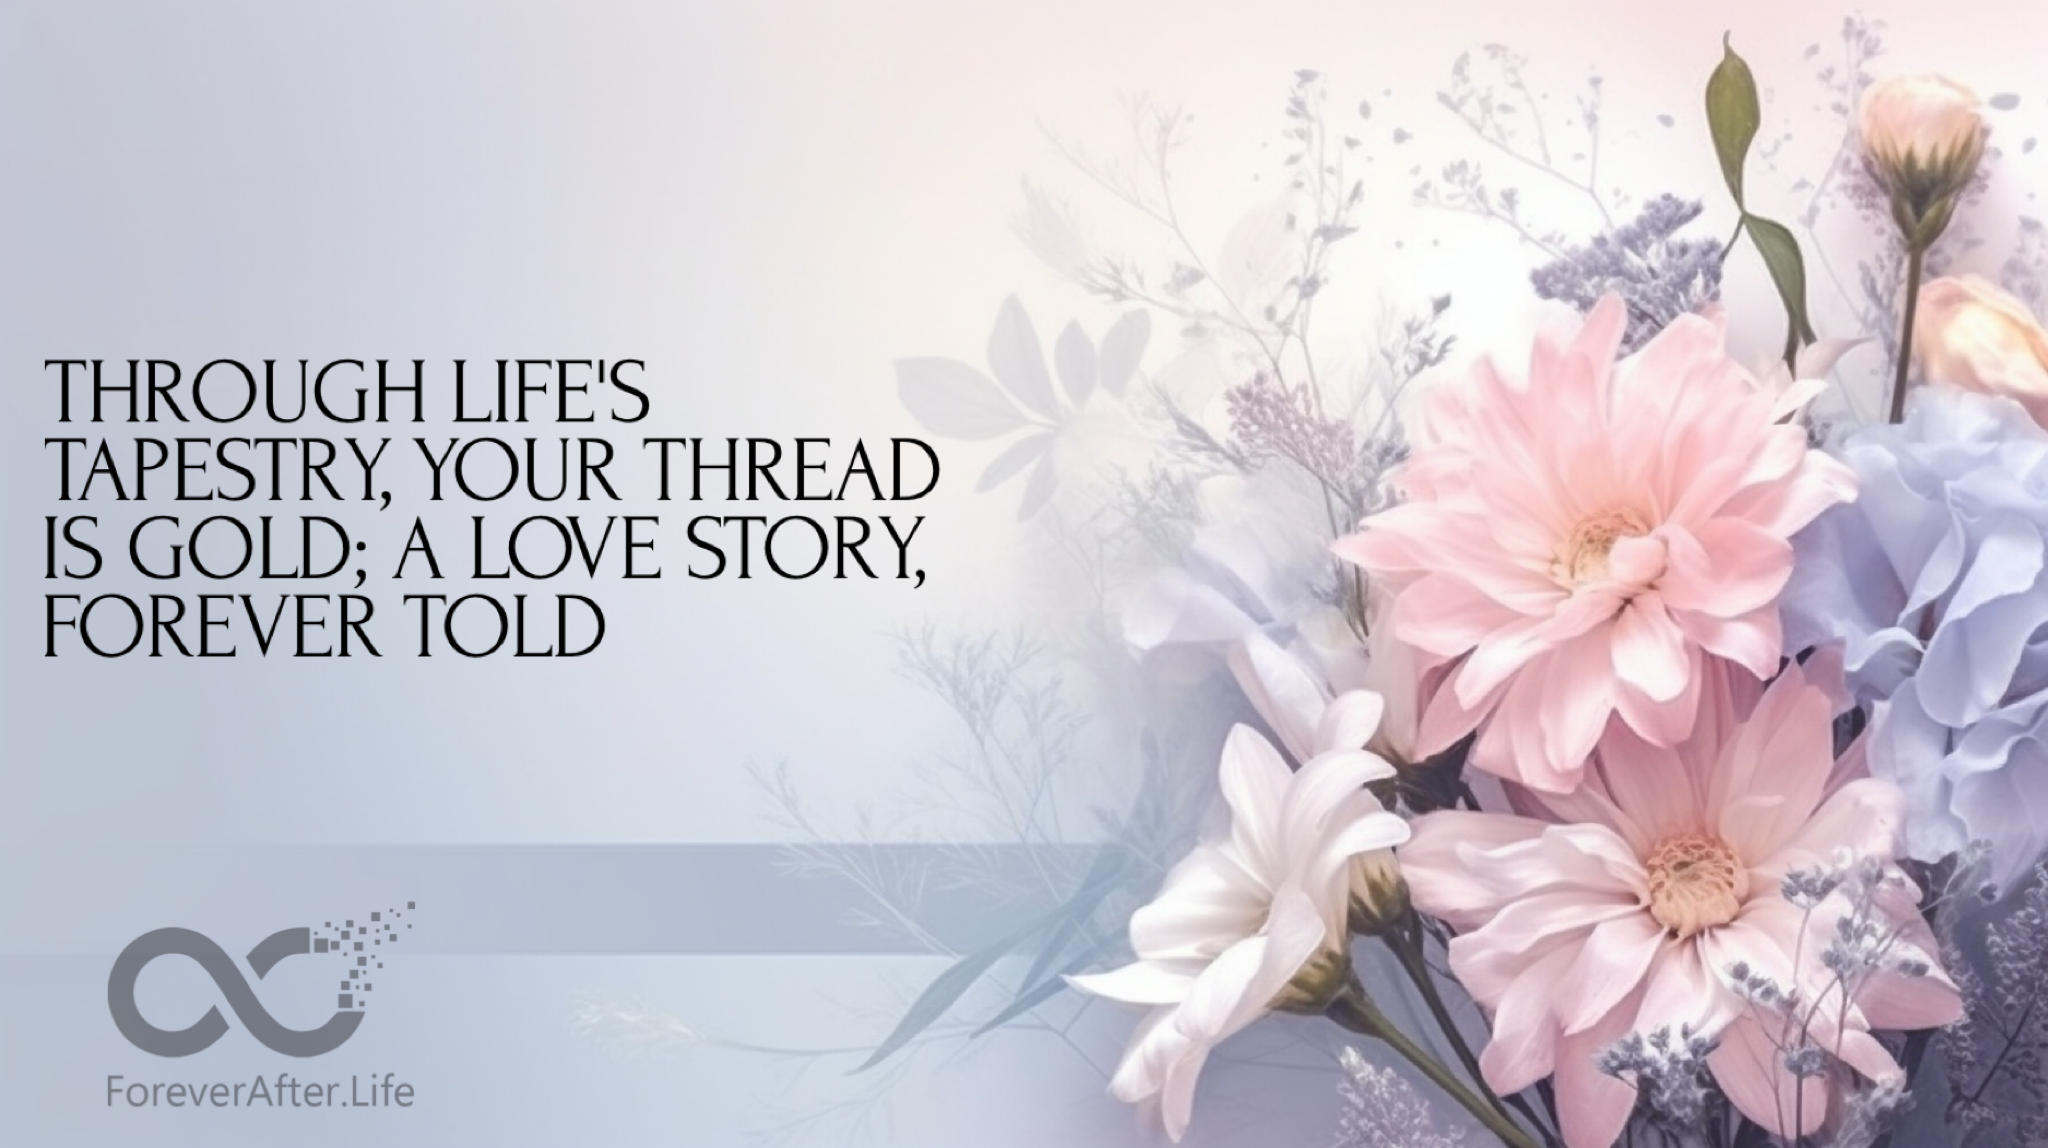 Through life's tapestry, your thread is gold; a love story, forever told